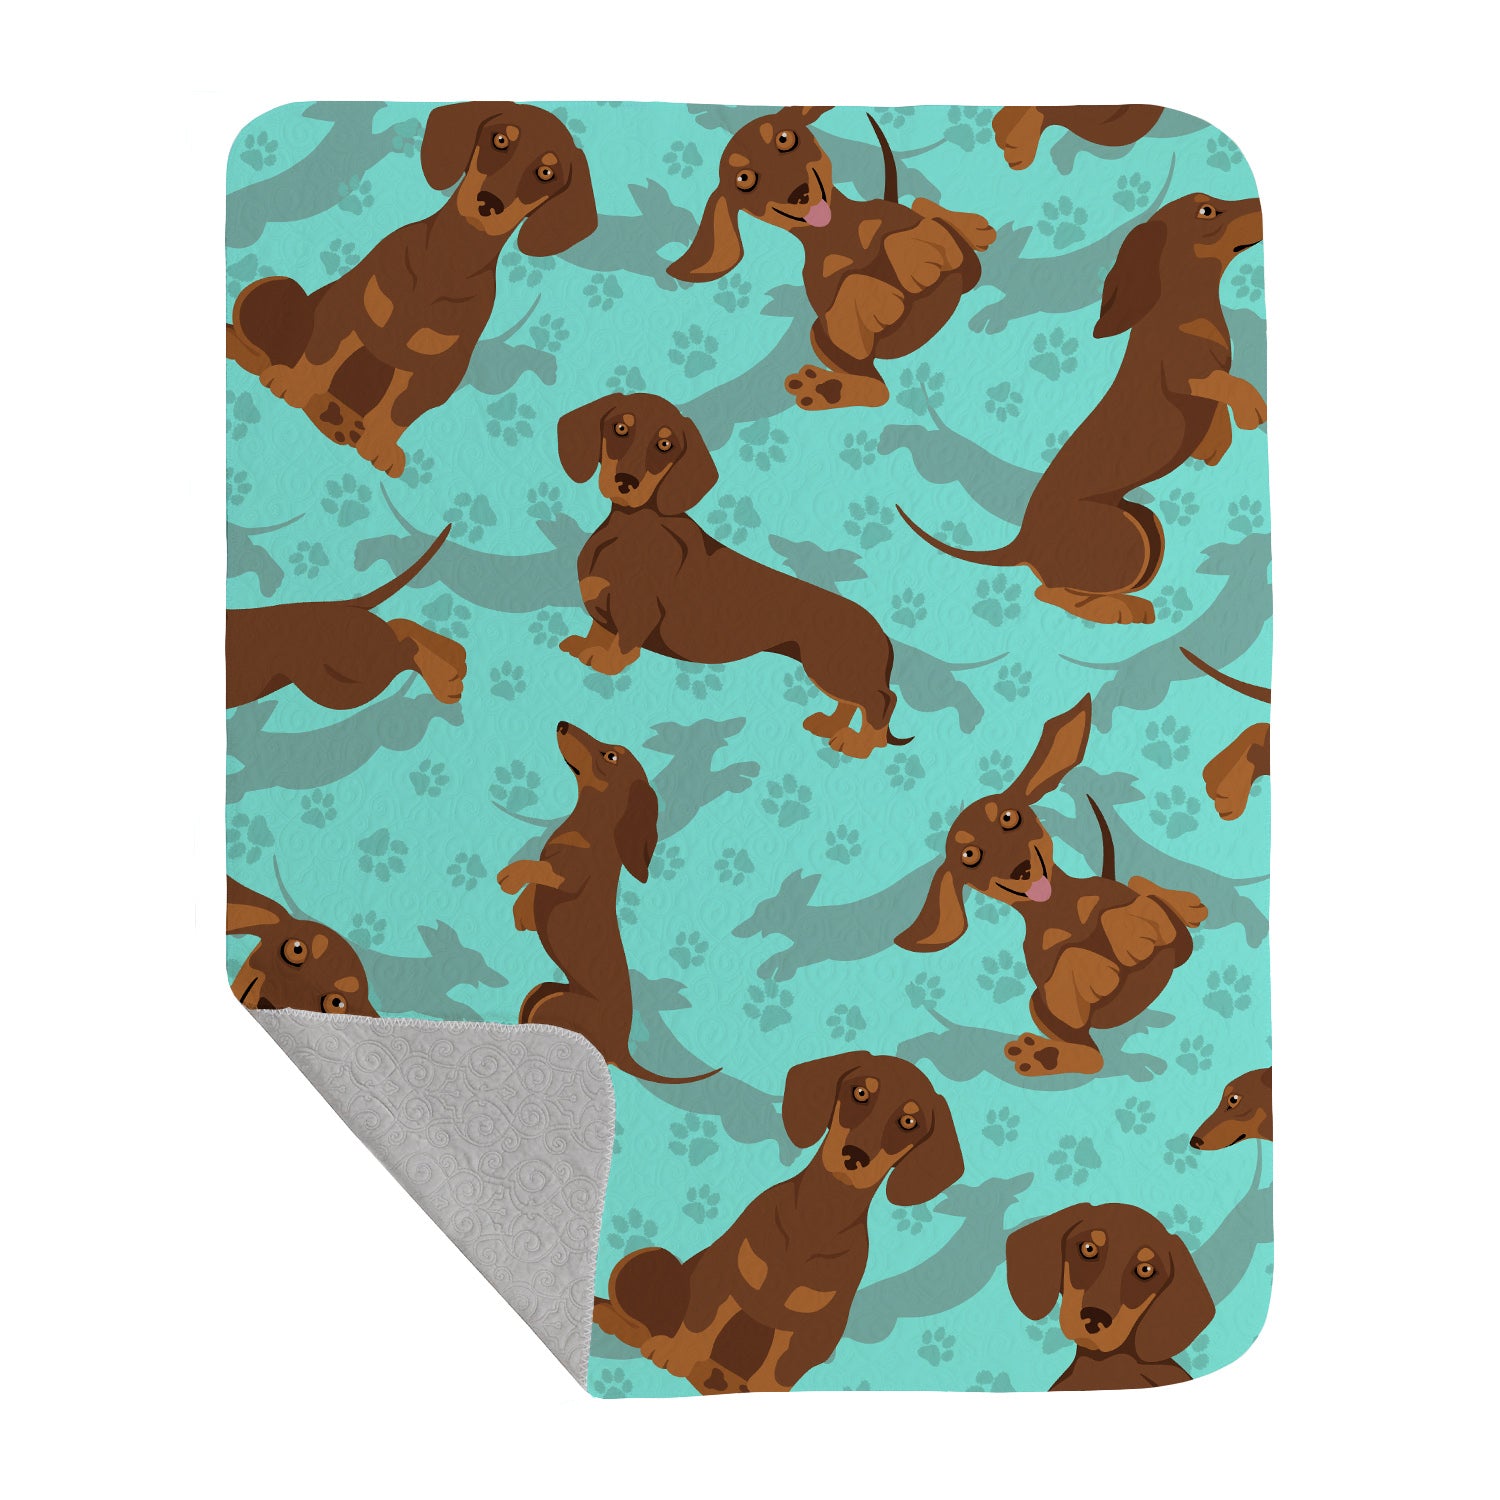 Buy this Chocolate and Tan Dachshund Quilted Blanket 50x60